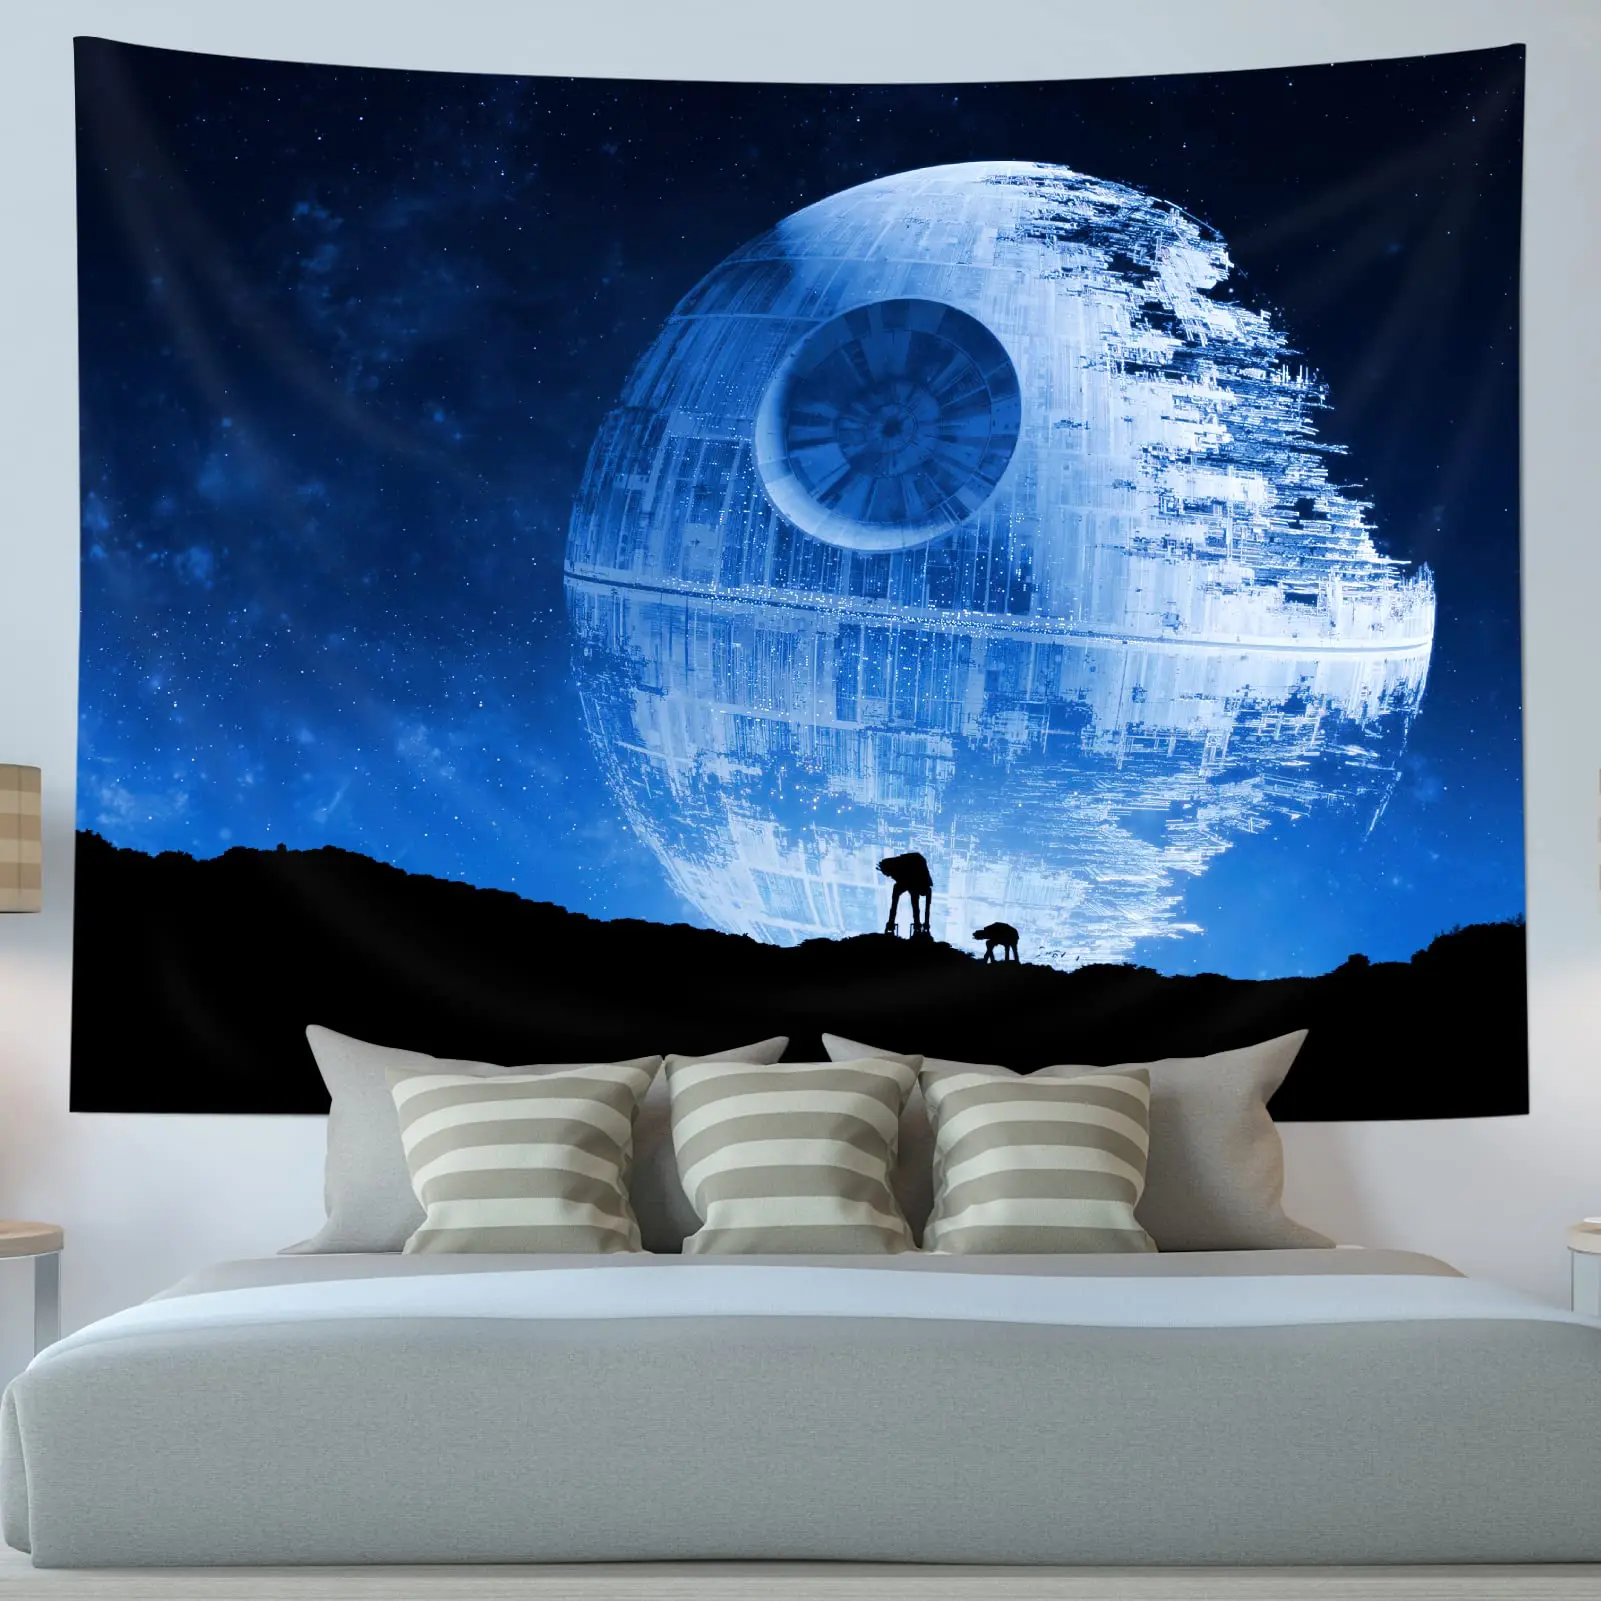 

Death Planet Tapestry Death Stars Blue Galaxy Planet Cosmic Wall Hanging Art Decor Bedroom Living Room College Dorm Tapestries